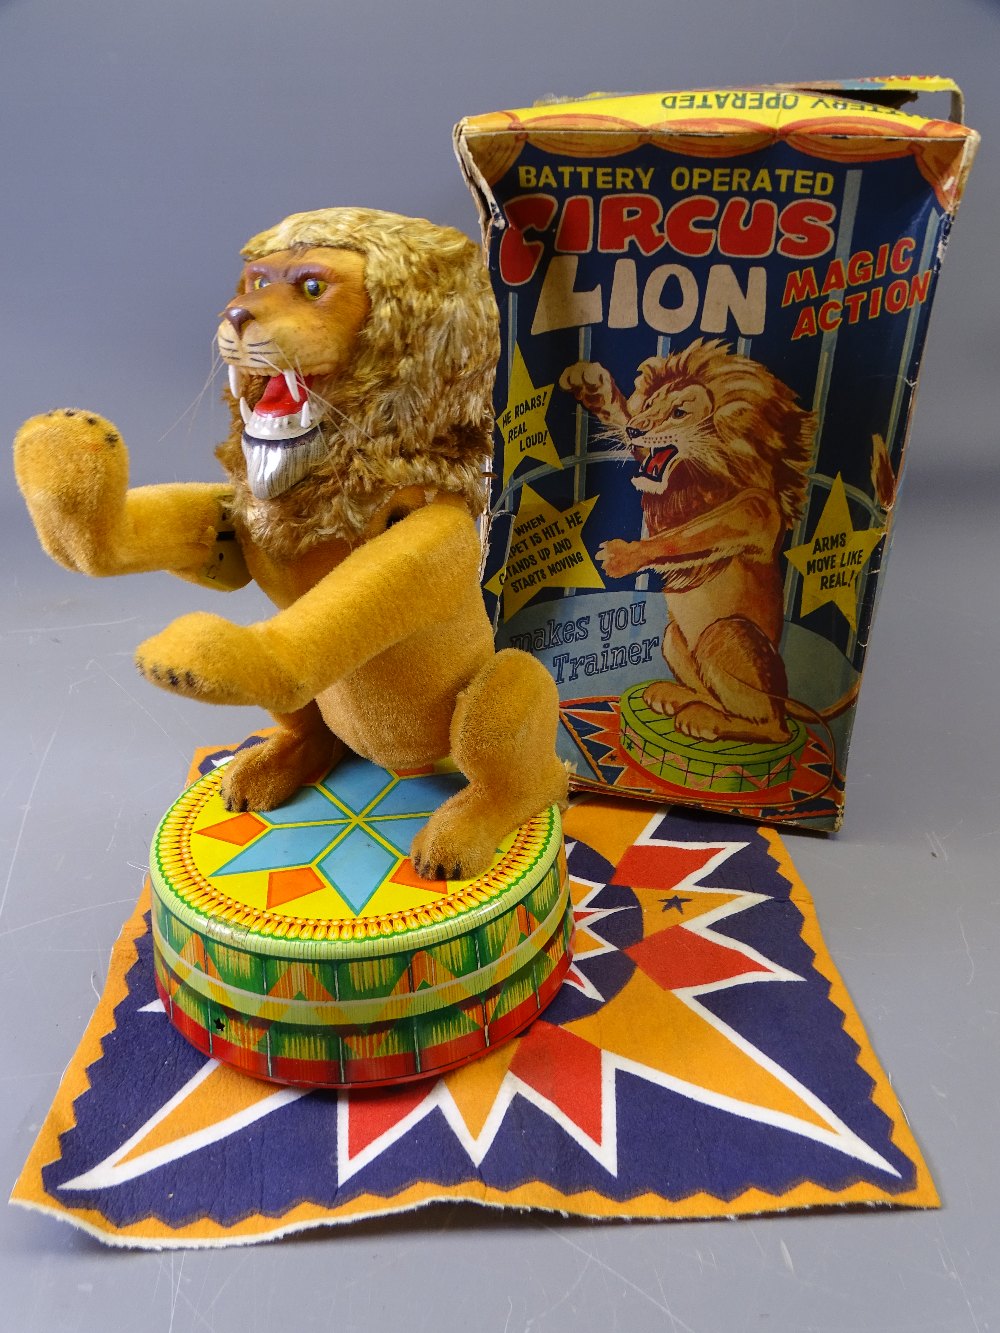 VINTAGE BATTERY OPERATED CIRCUS LION in original box